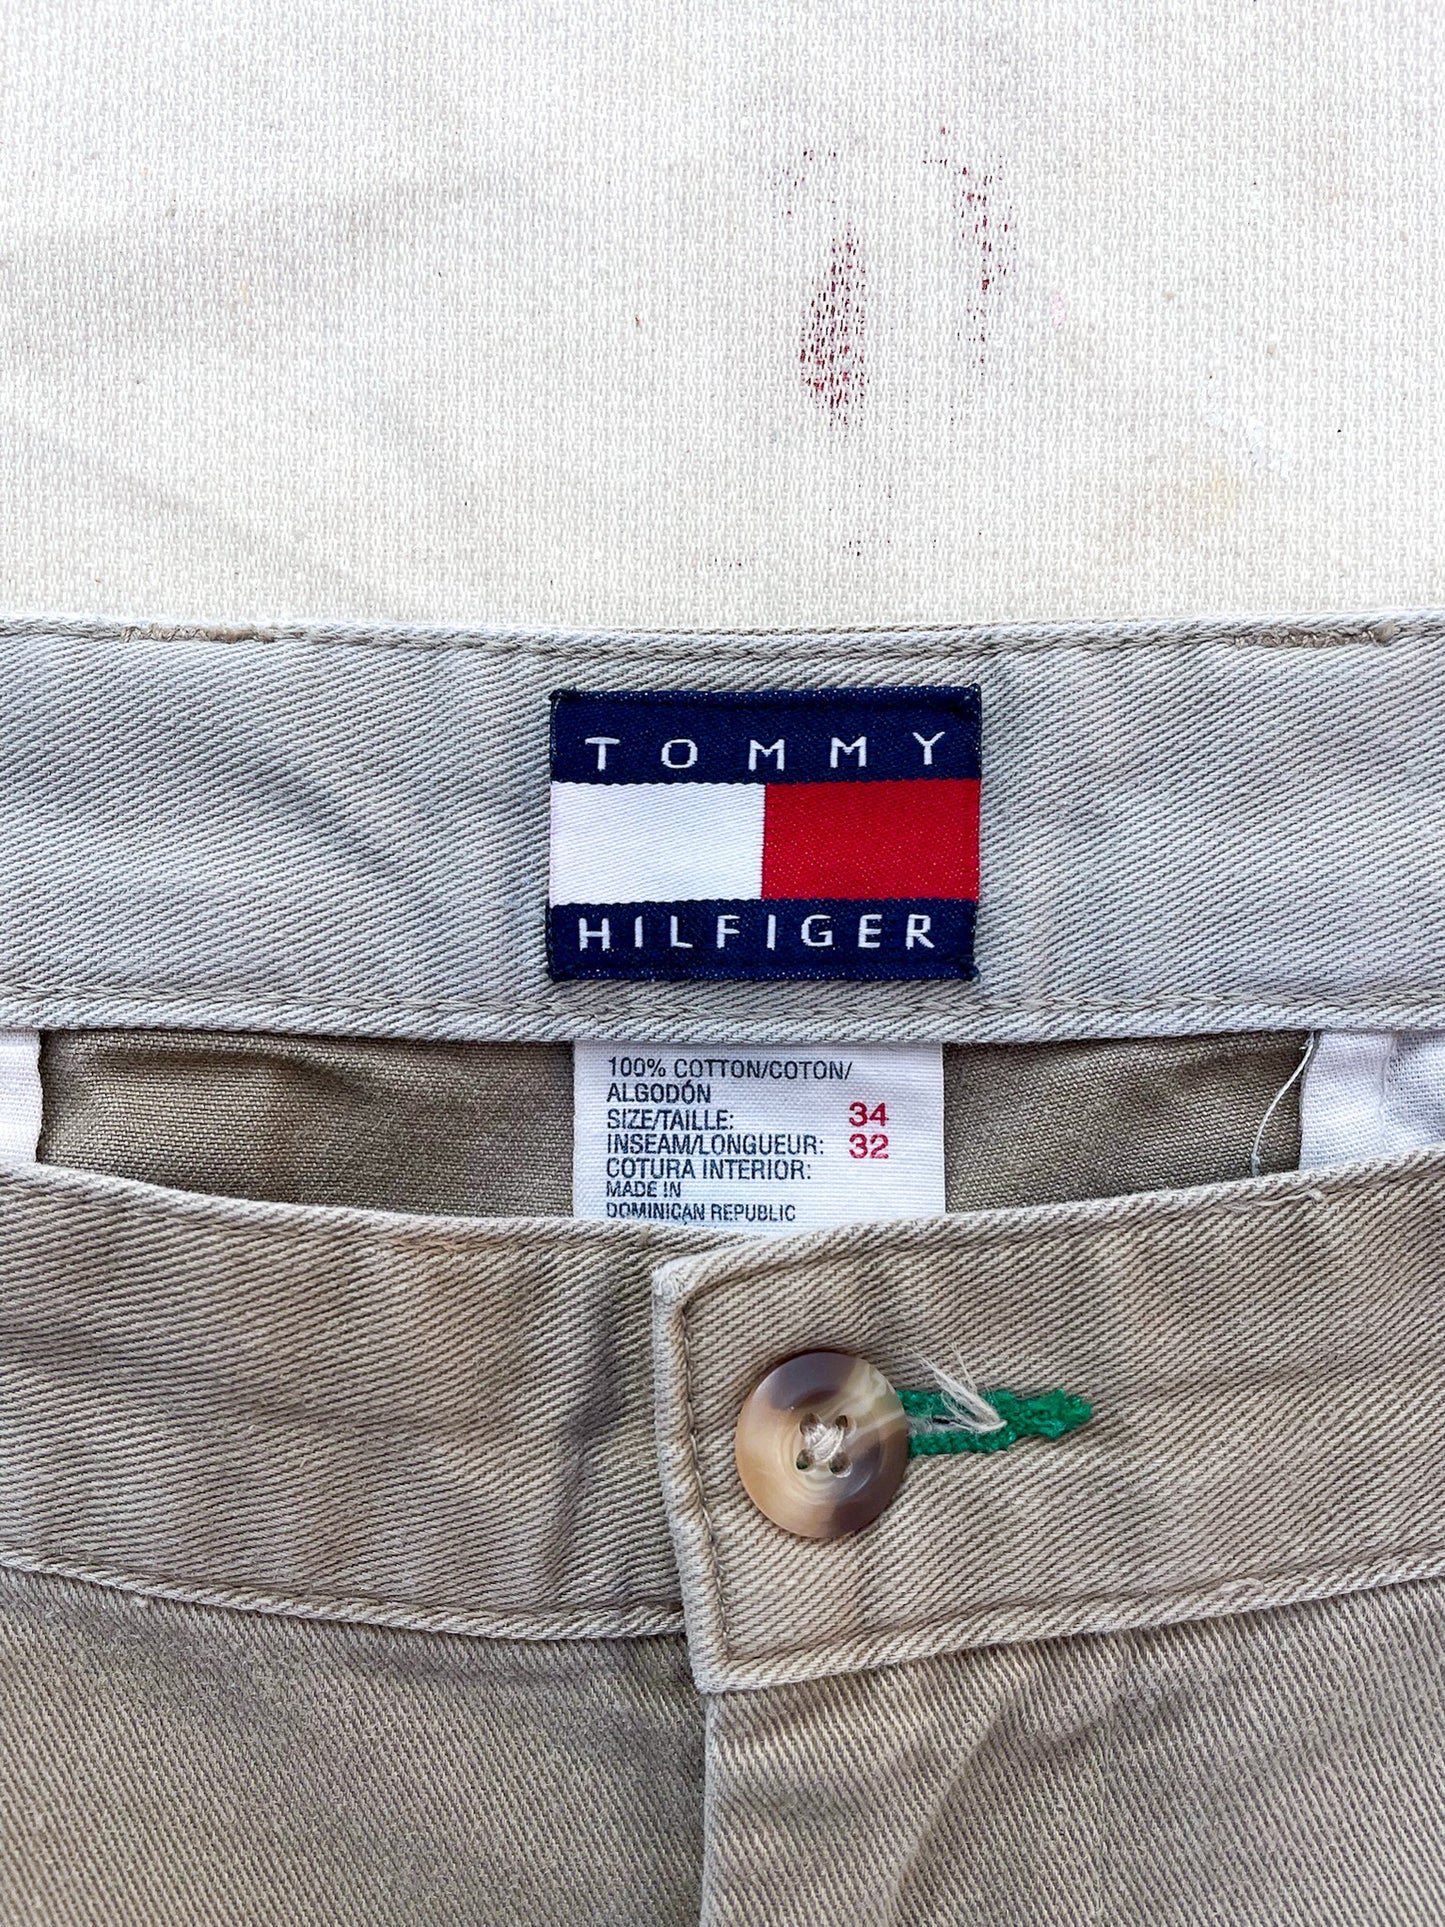 Tommy Hilfiger Pleated Pants—[34x31]